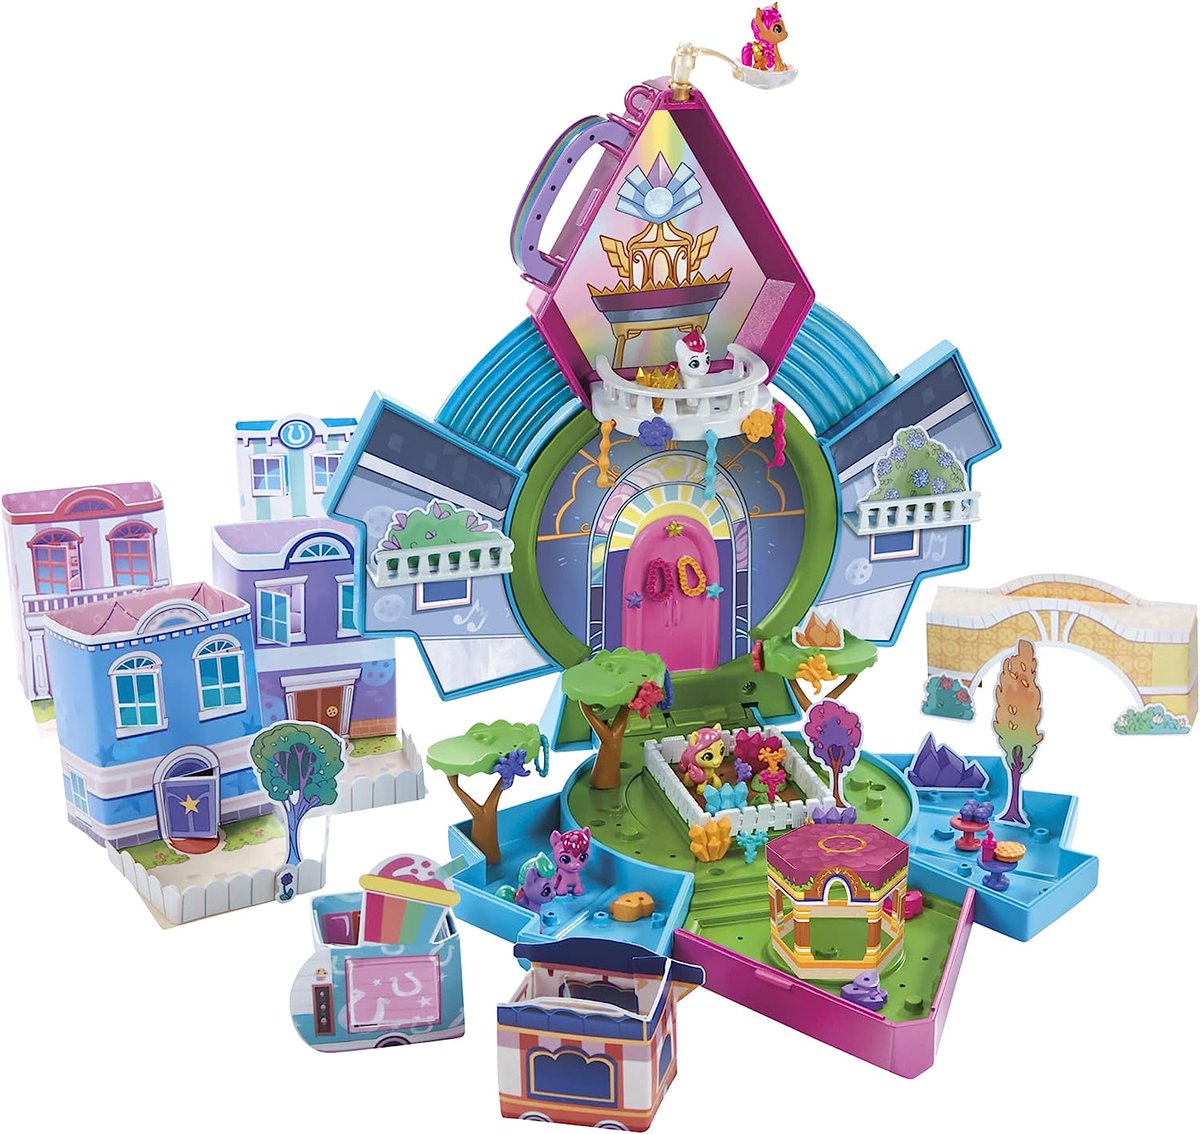 Amazon Prime Day deals are here! There are quite a few recent #MLP sets on offer, including Mini World Magic (-48%), Musical Mane Melody (-58%) and more G4/G5 sets: amzn.to/3pICL3u (affiliate link)